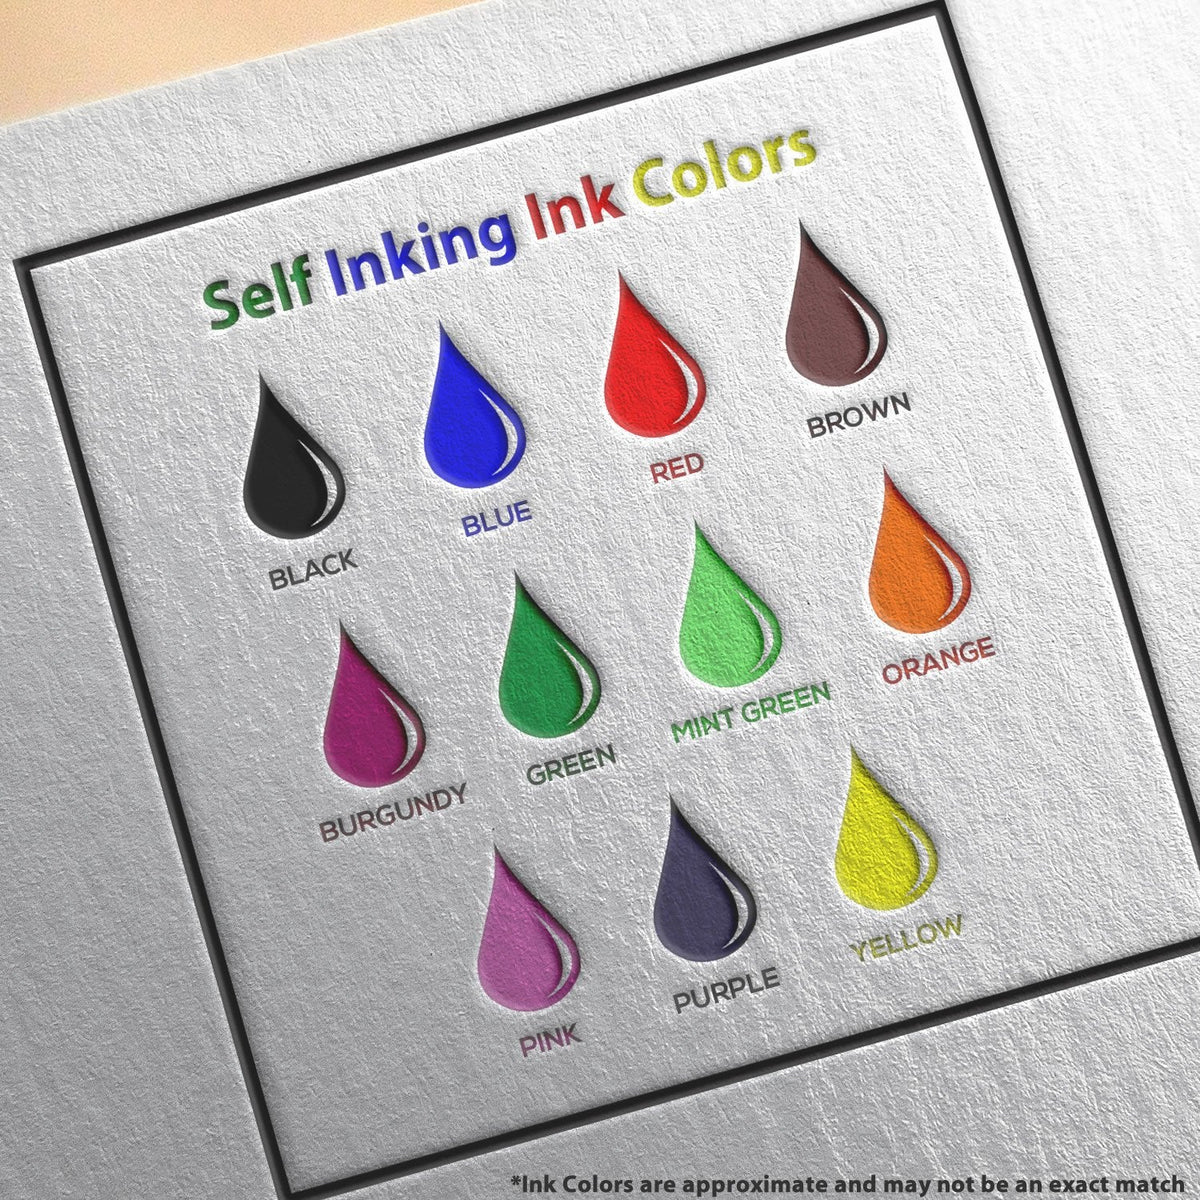 Self-Inking Privileged Stamp Ink Color Options